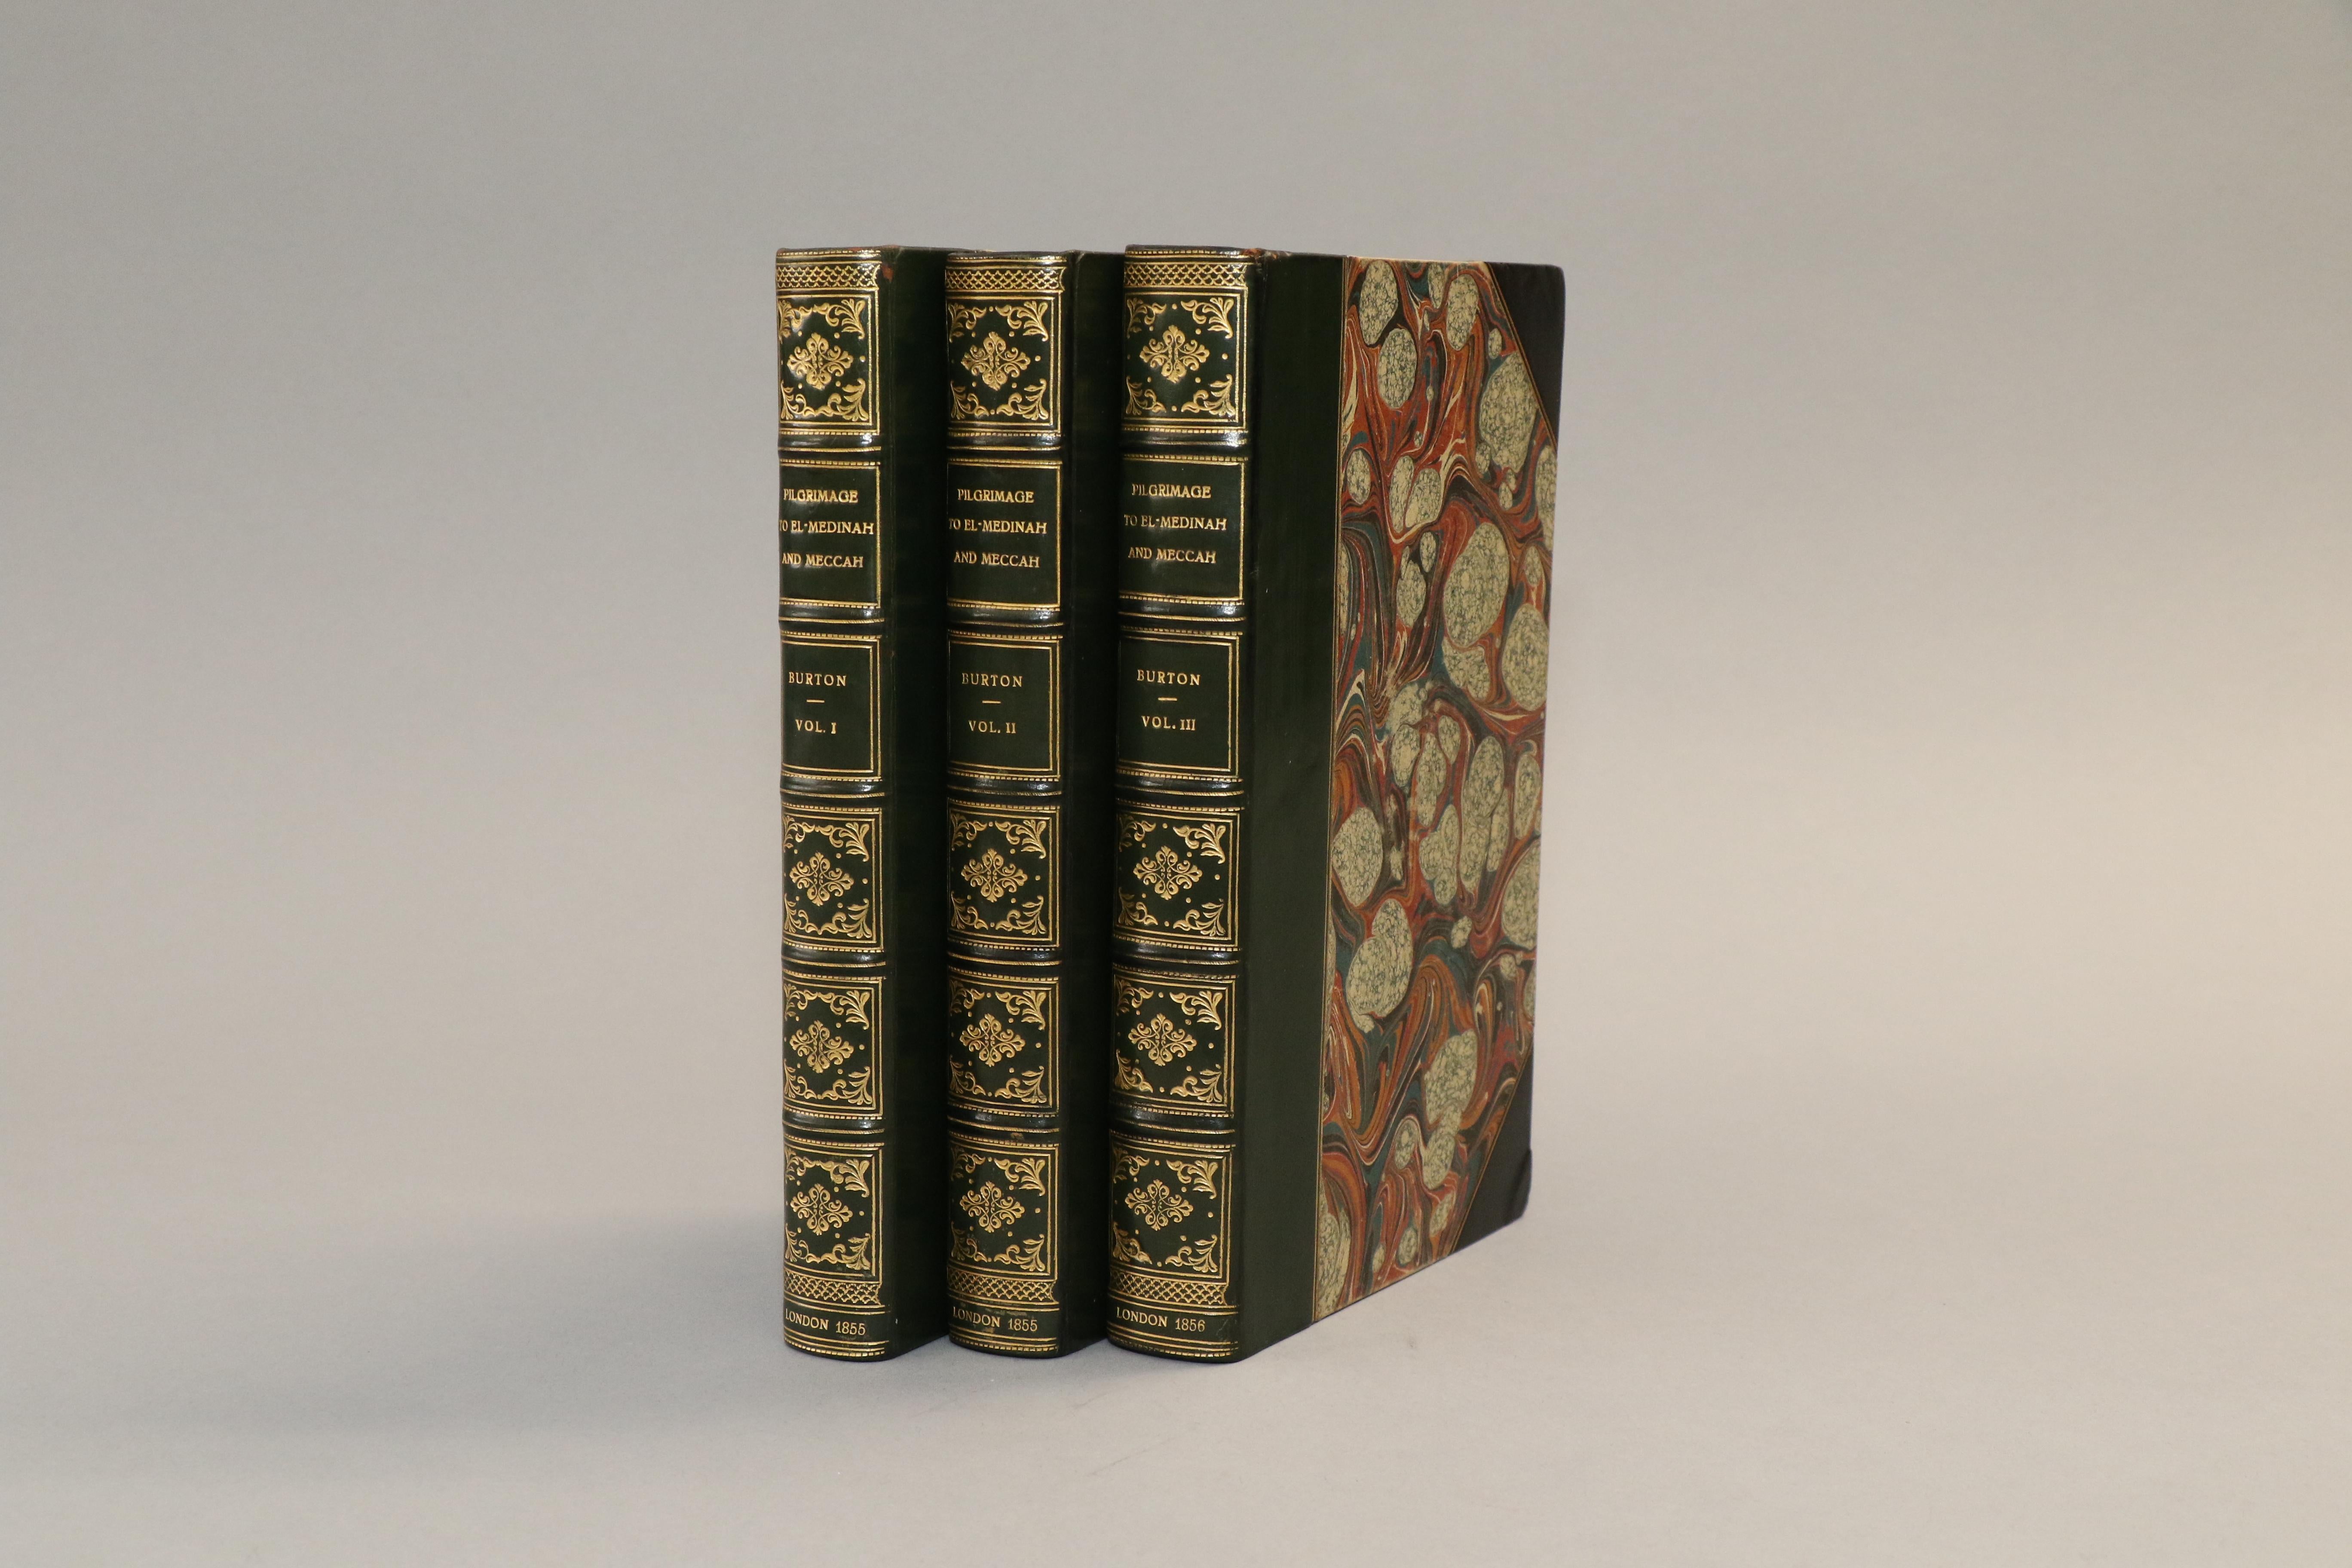 3 volumes. First edition! Rebound in 3/4 green calf with marbeled edges, raised bands, & gilt panels. Published in London by Longman, Brown, Green in 1855.